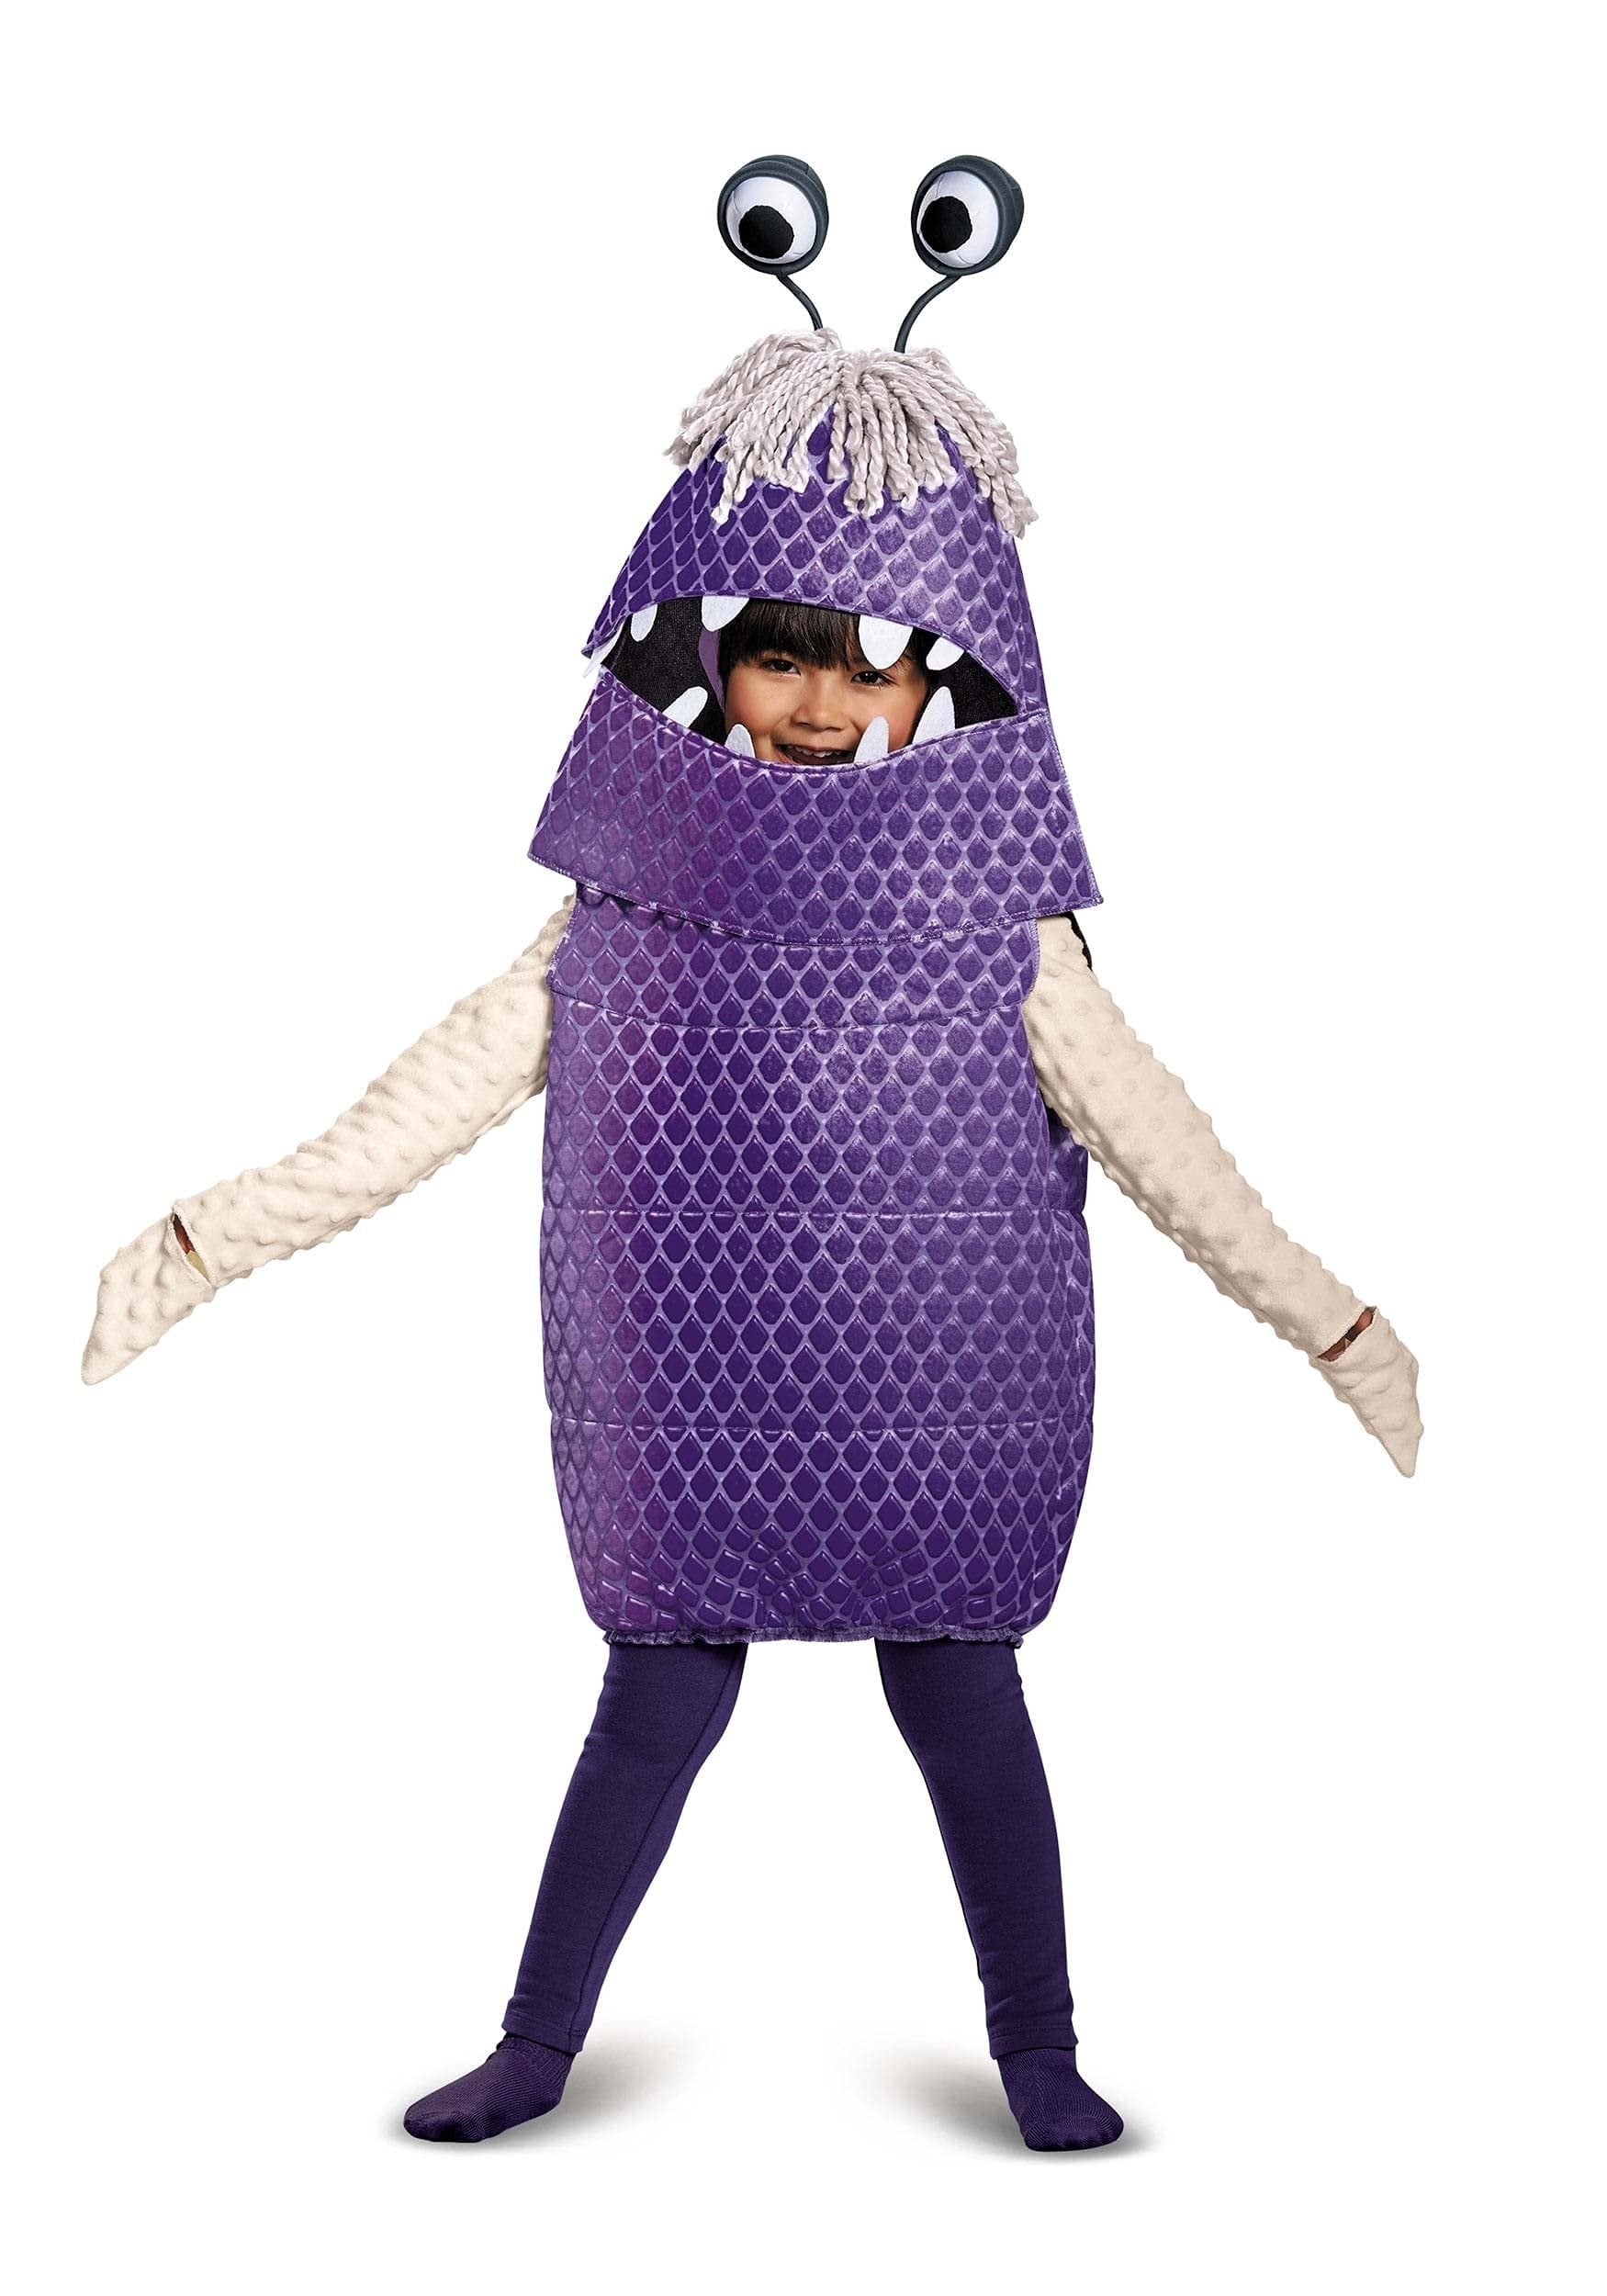 Boo Deluxe Toddler Costume, Purple, Large (4-6)